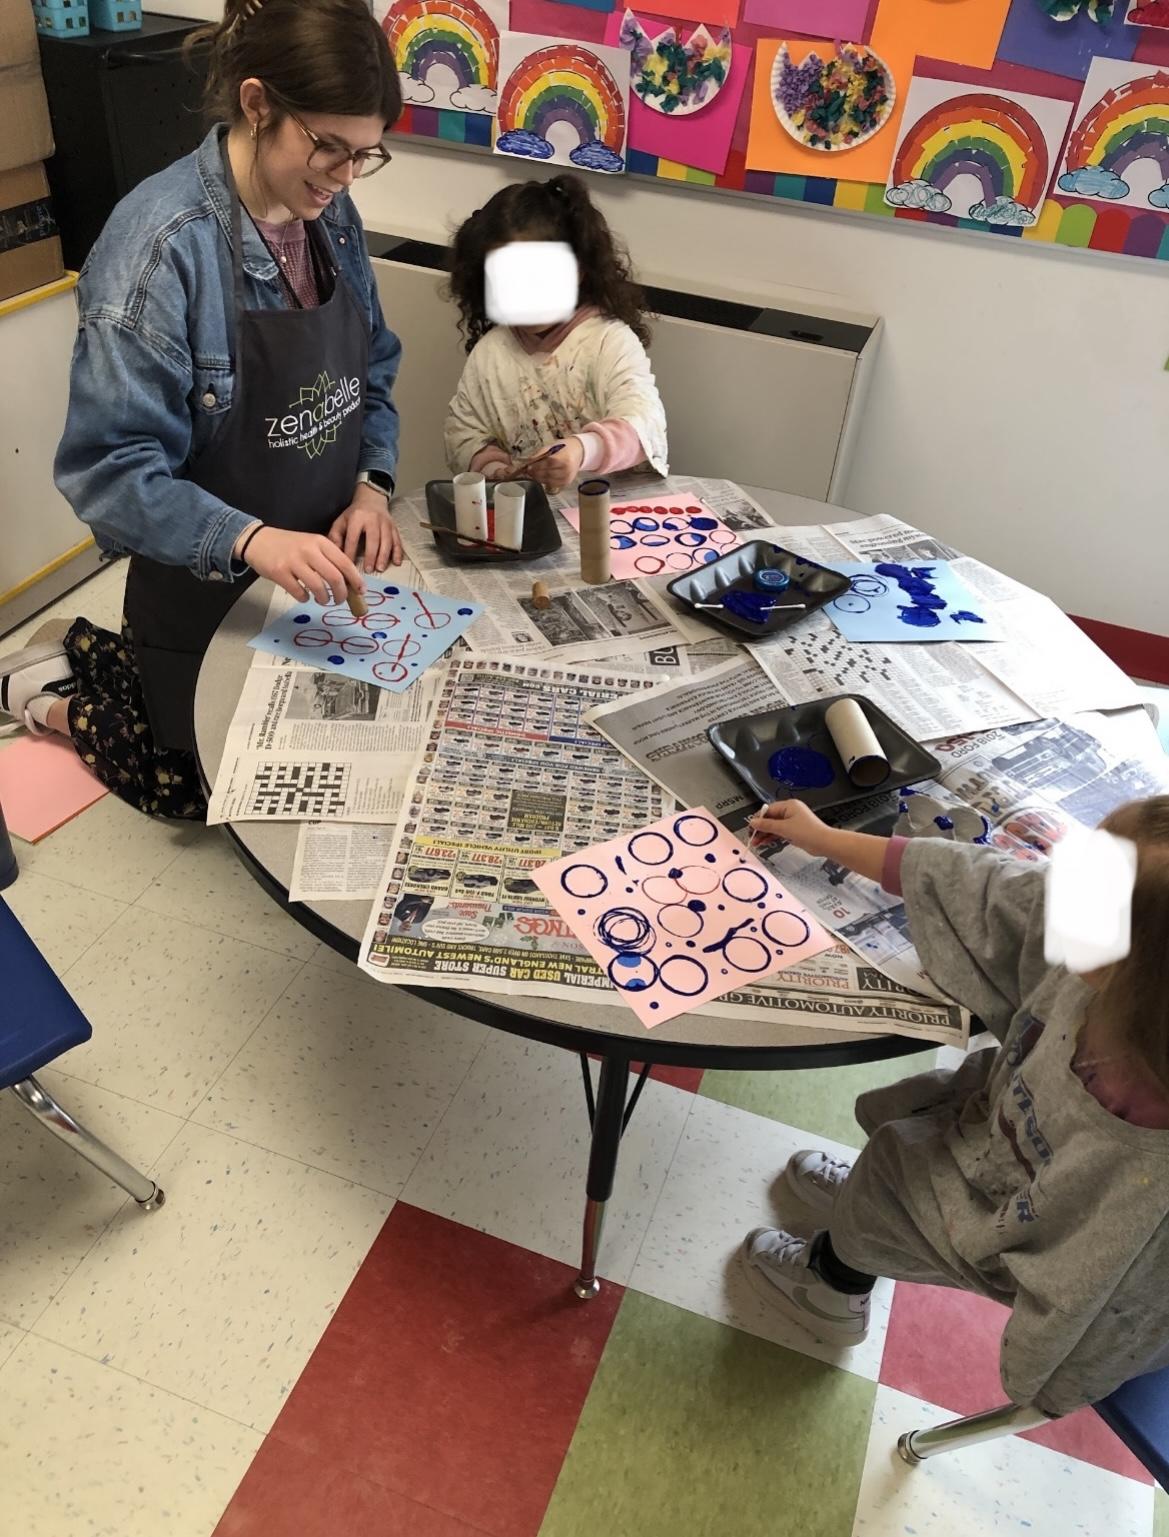 Pre-K students at Colt Andrews Elementary School explore recycled materials to create prints. Photographed by Lynne Ramos.